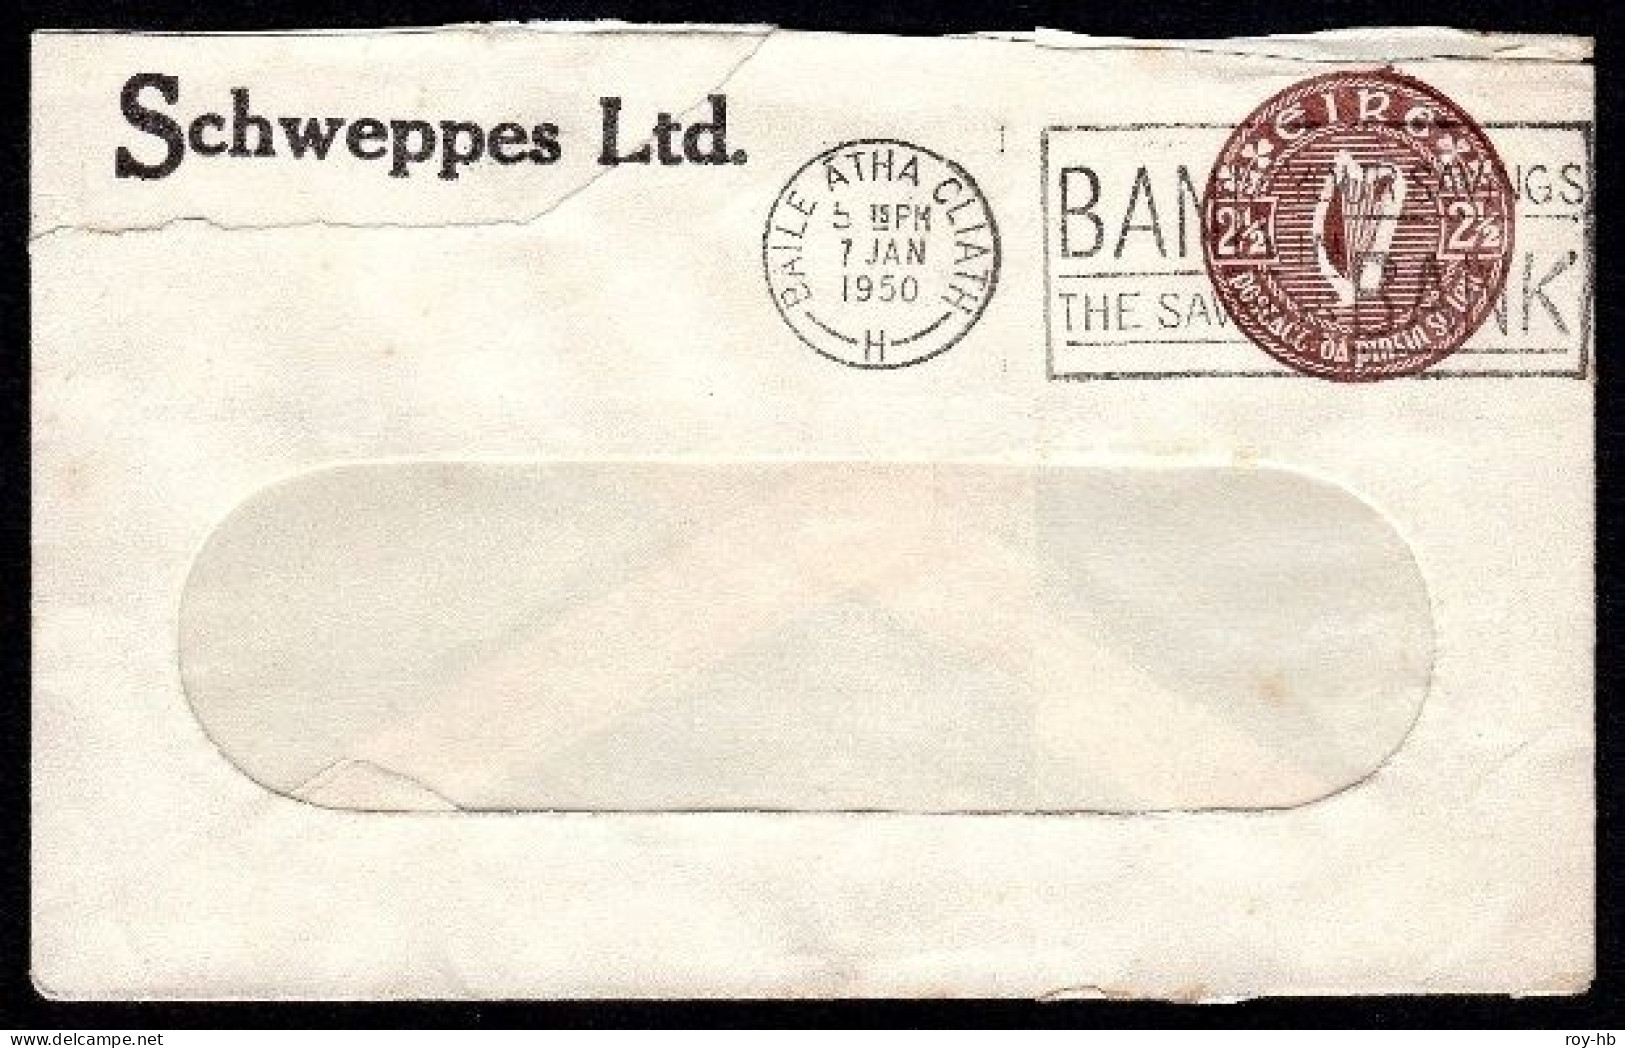 Stamped To Order: Schweppes Ltd, 1949 2½d Brown Envelope With Rounded Window With Cellophane, Used - Postal Stationery